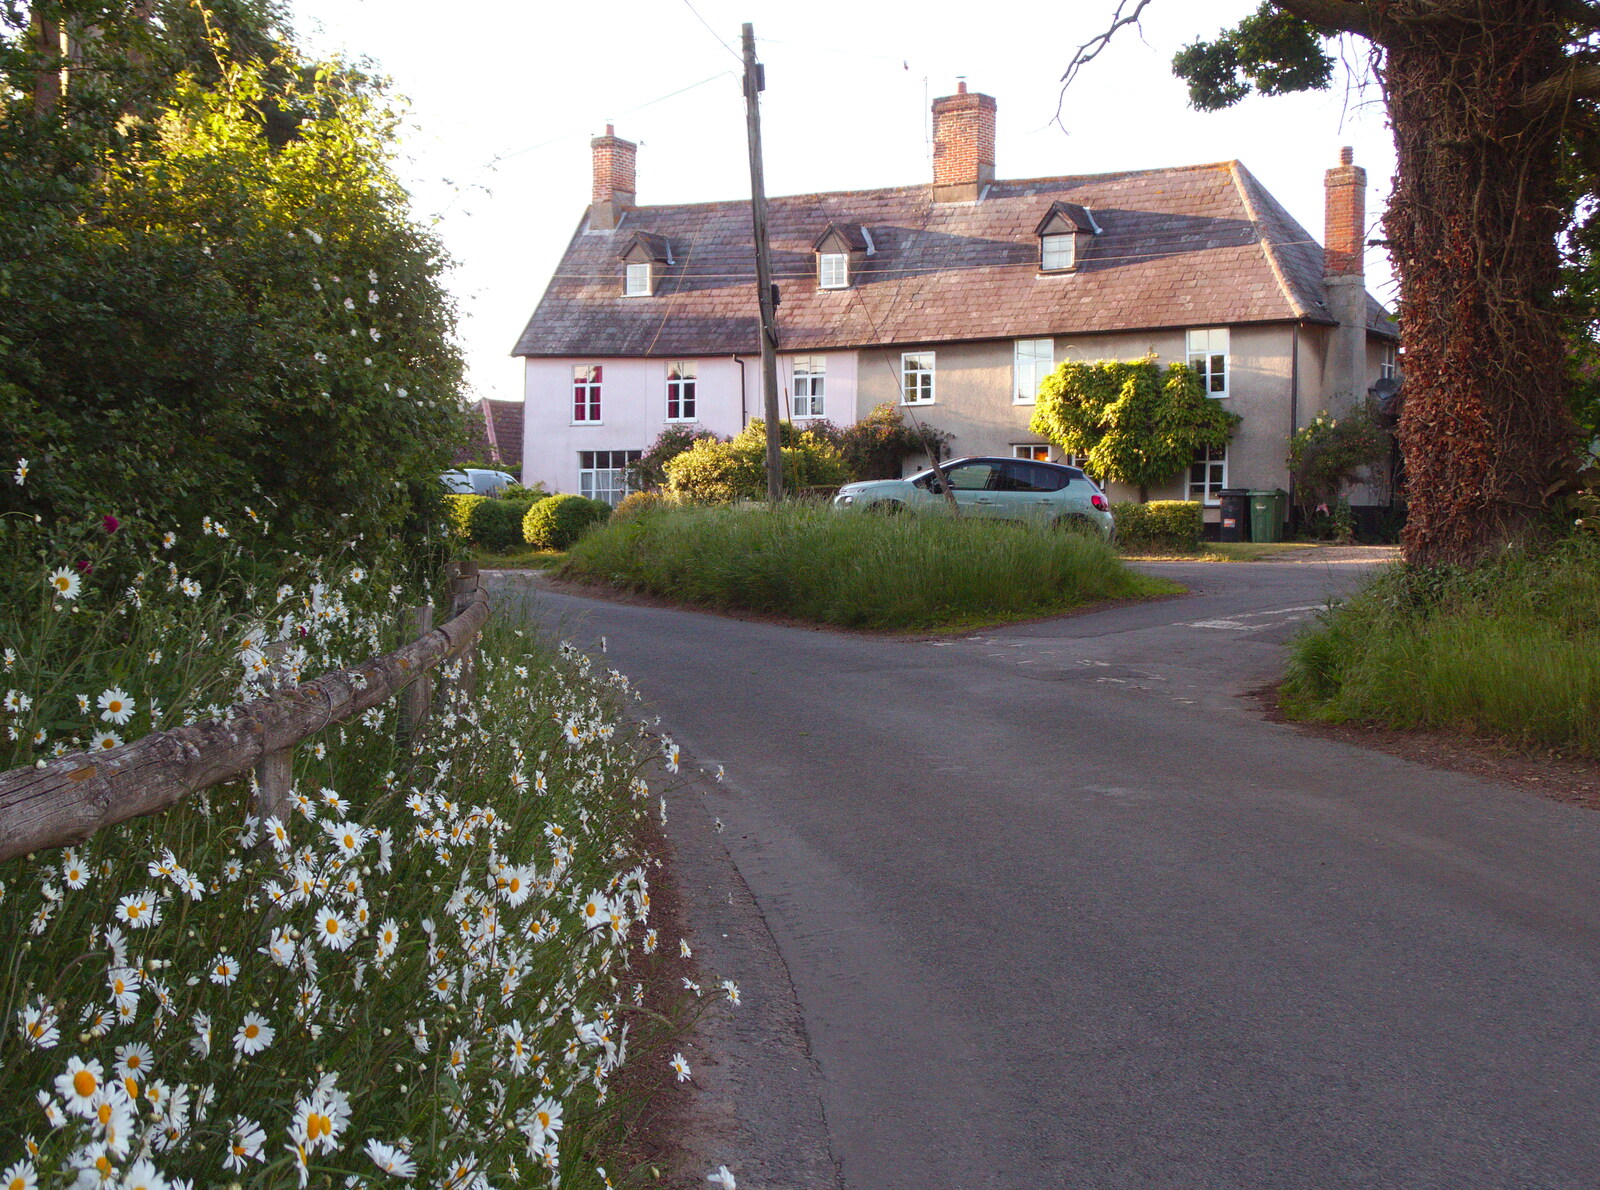 The BSCC at Gissing, Taxi Protests and Eye Scarecrows - 8th June 2019: Dog daisies and Gissing houses